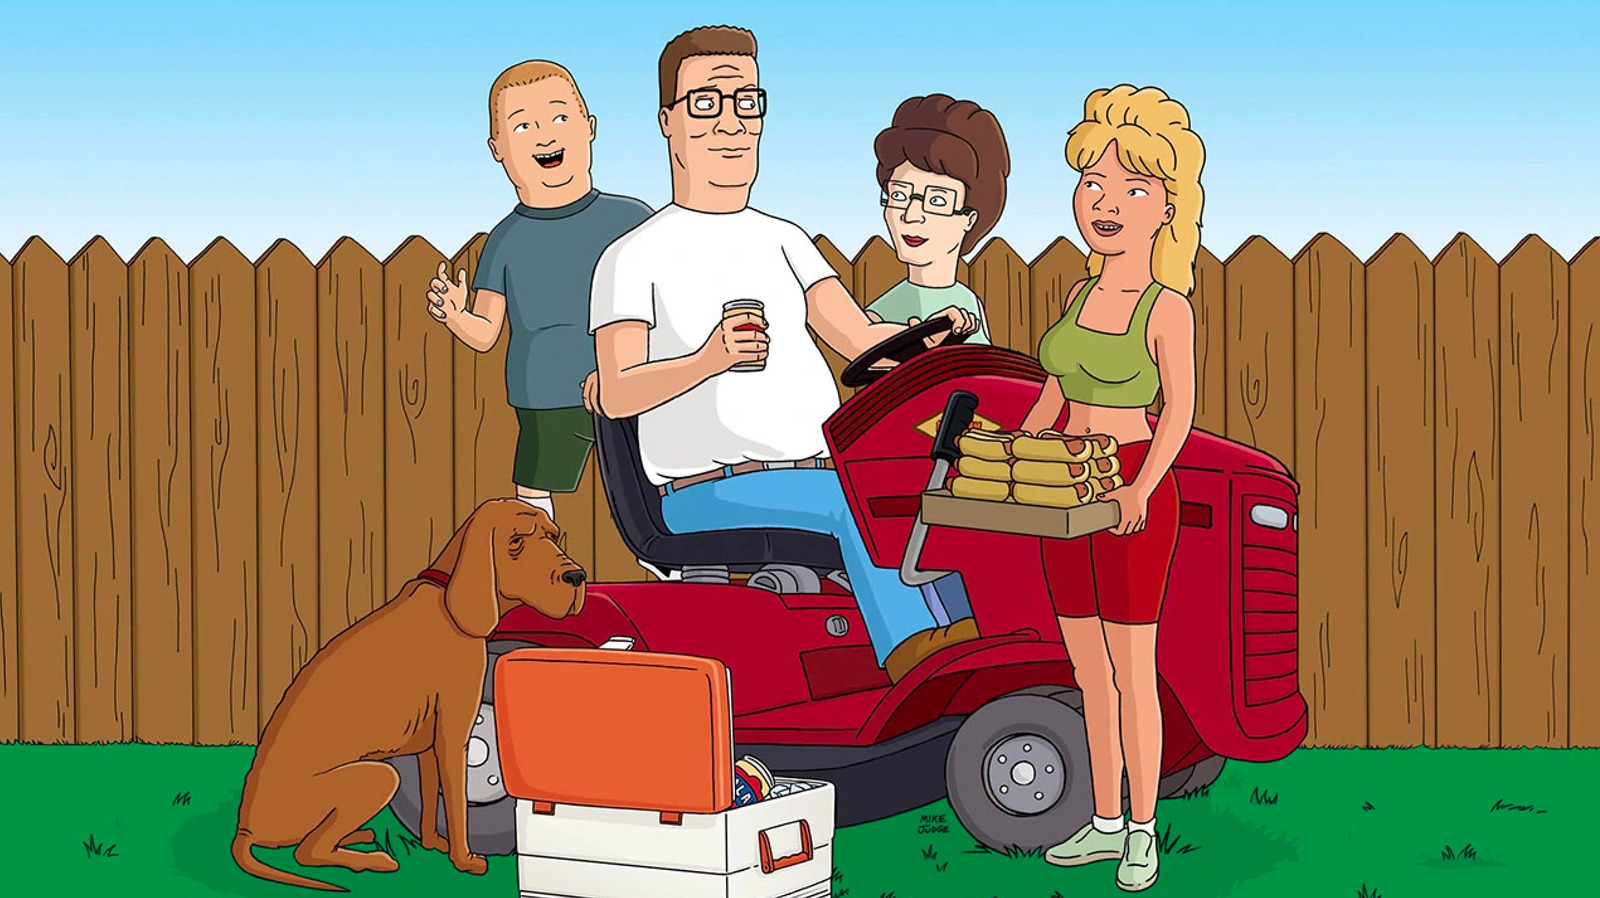 The King Of The Hill Revival Gets The Green Light From Hulu, Original